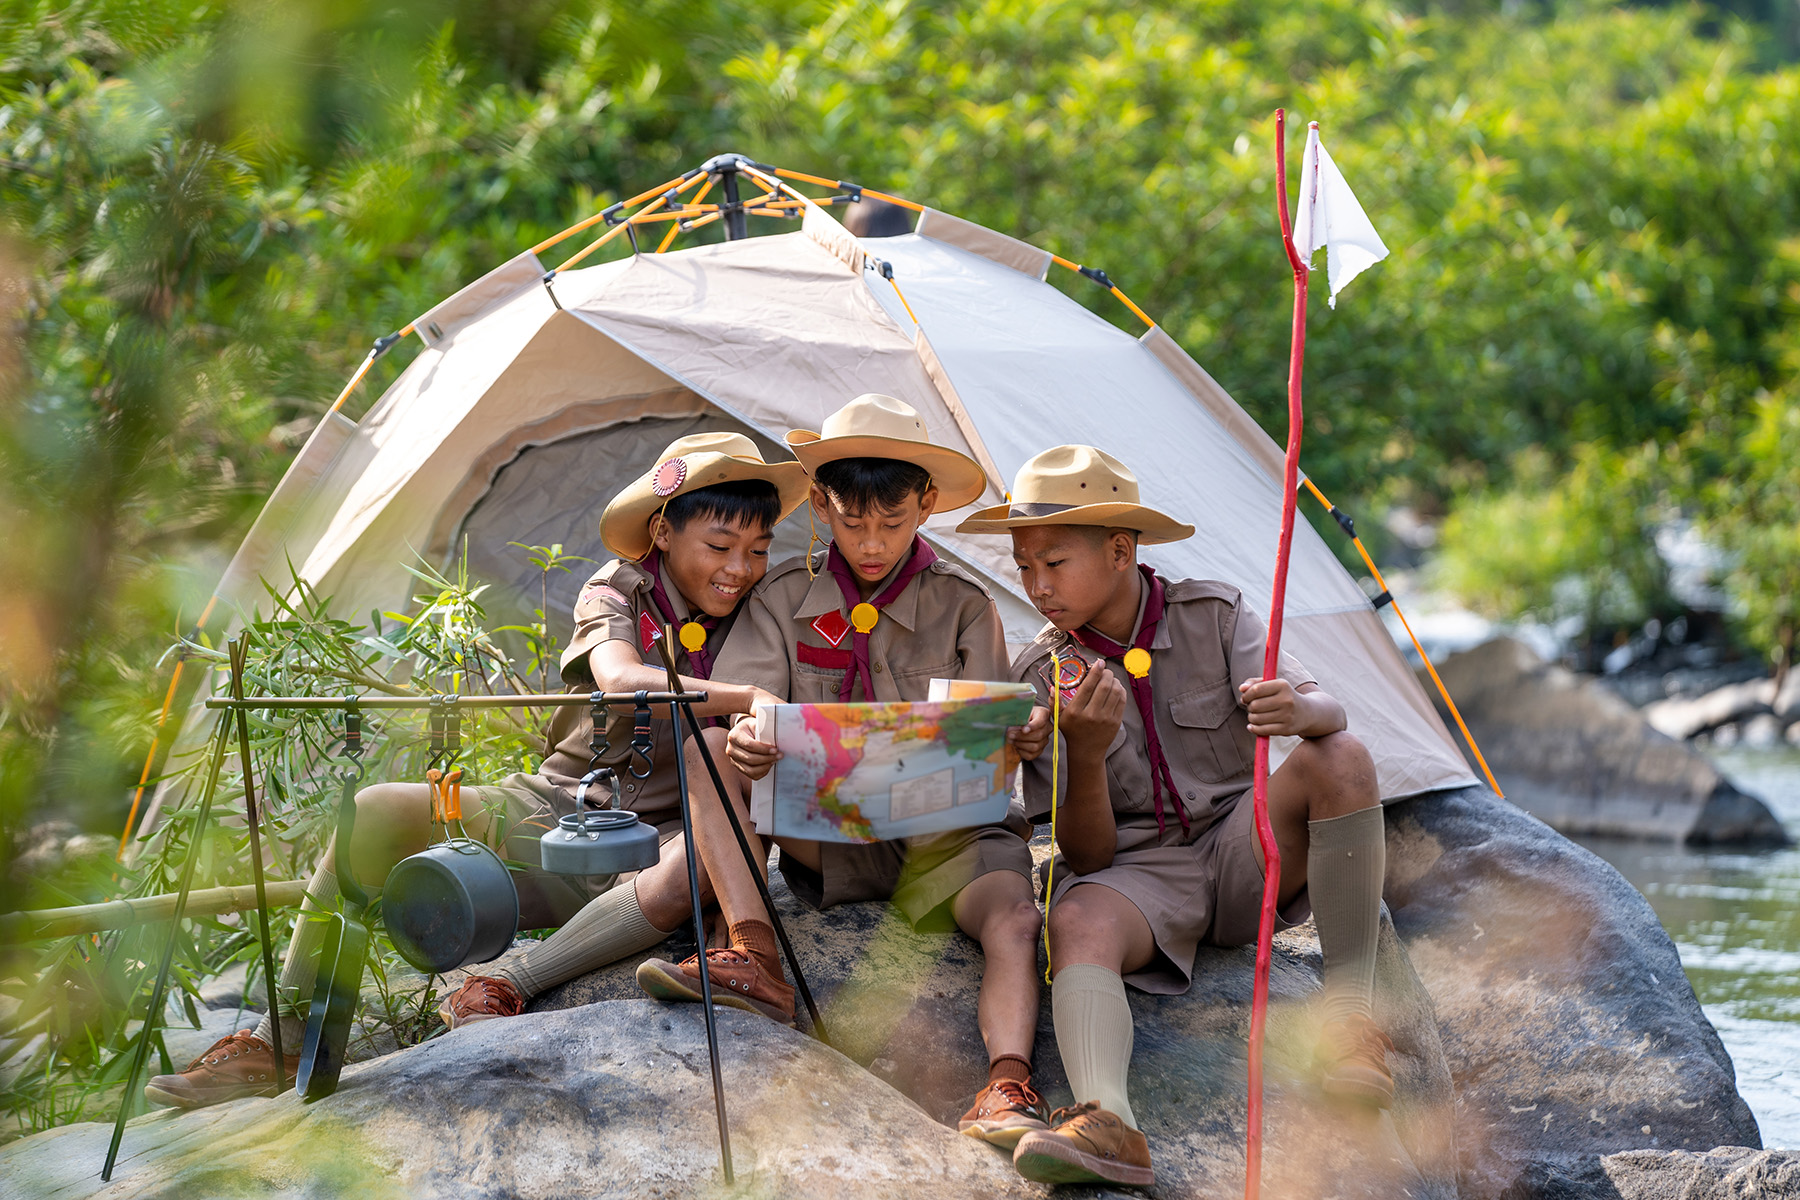 Group of boy scouts in uniform sitting beside a tent and figuring out where to go on the map. They look like they're having fun.